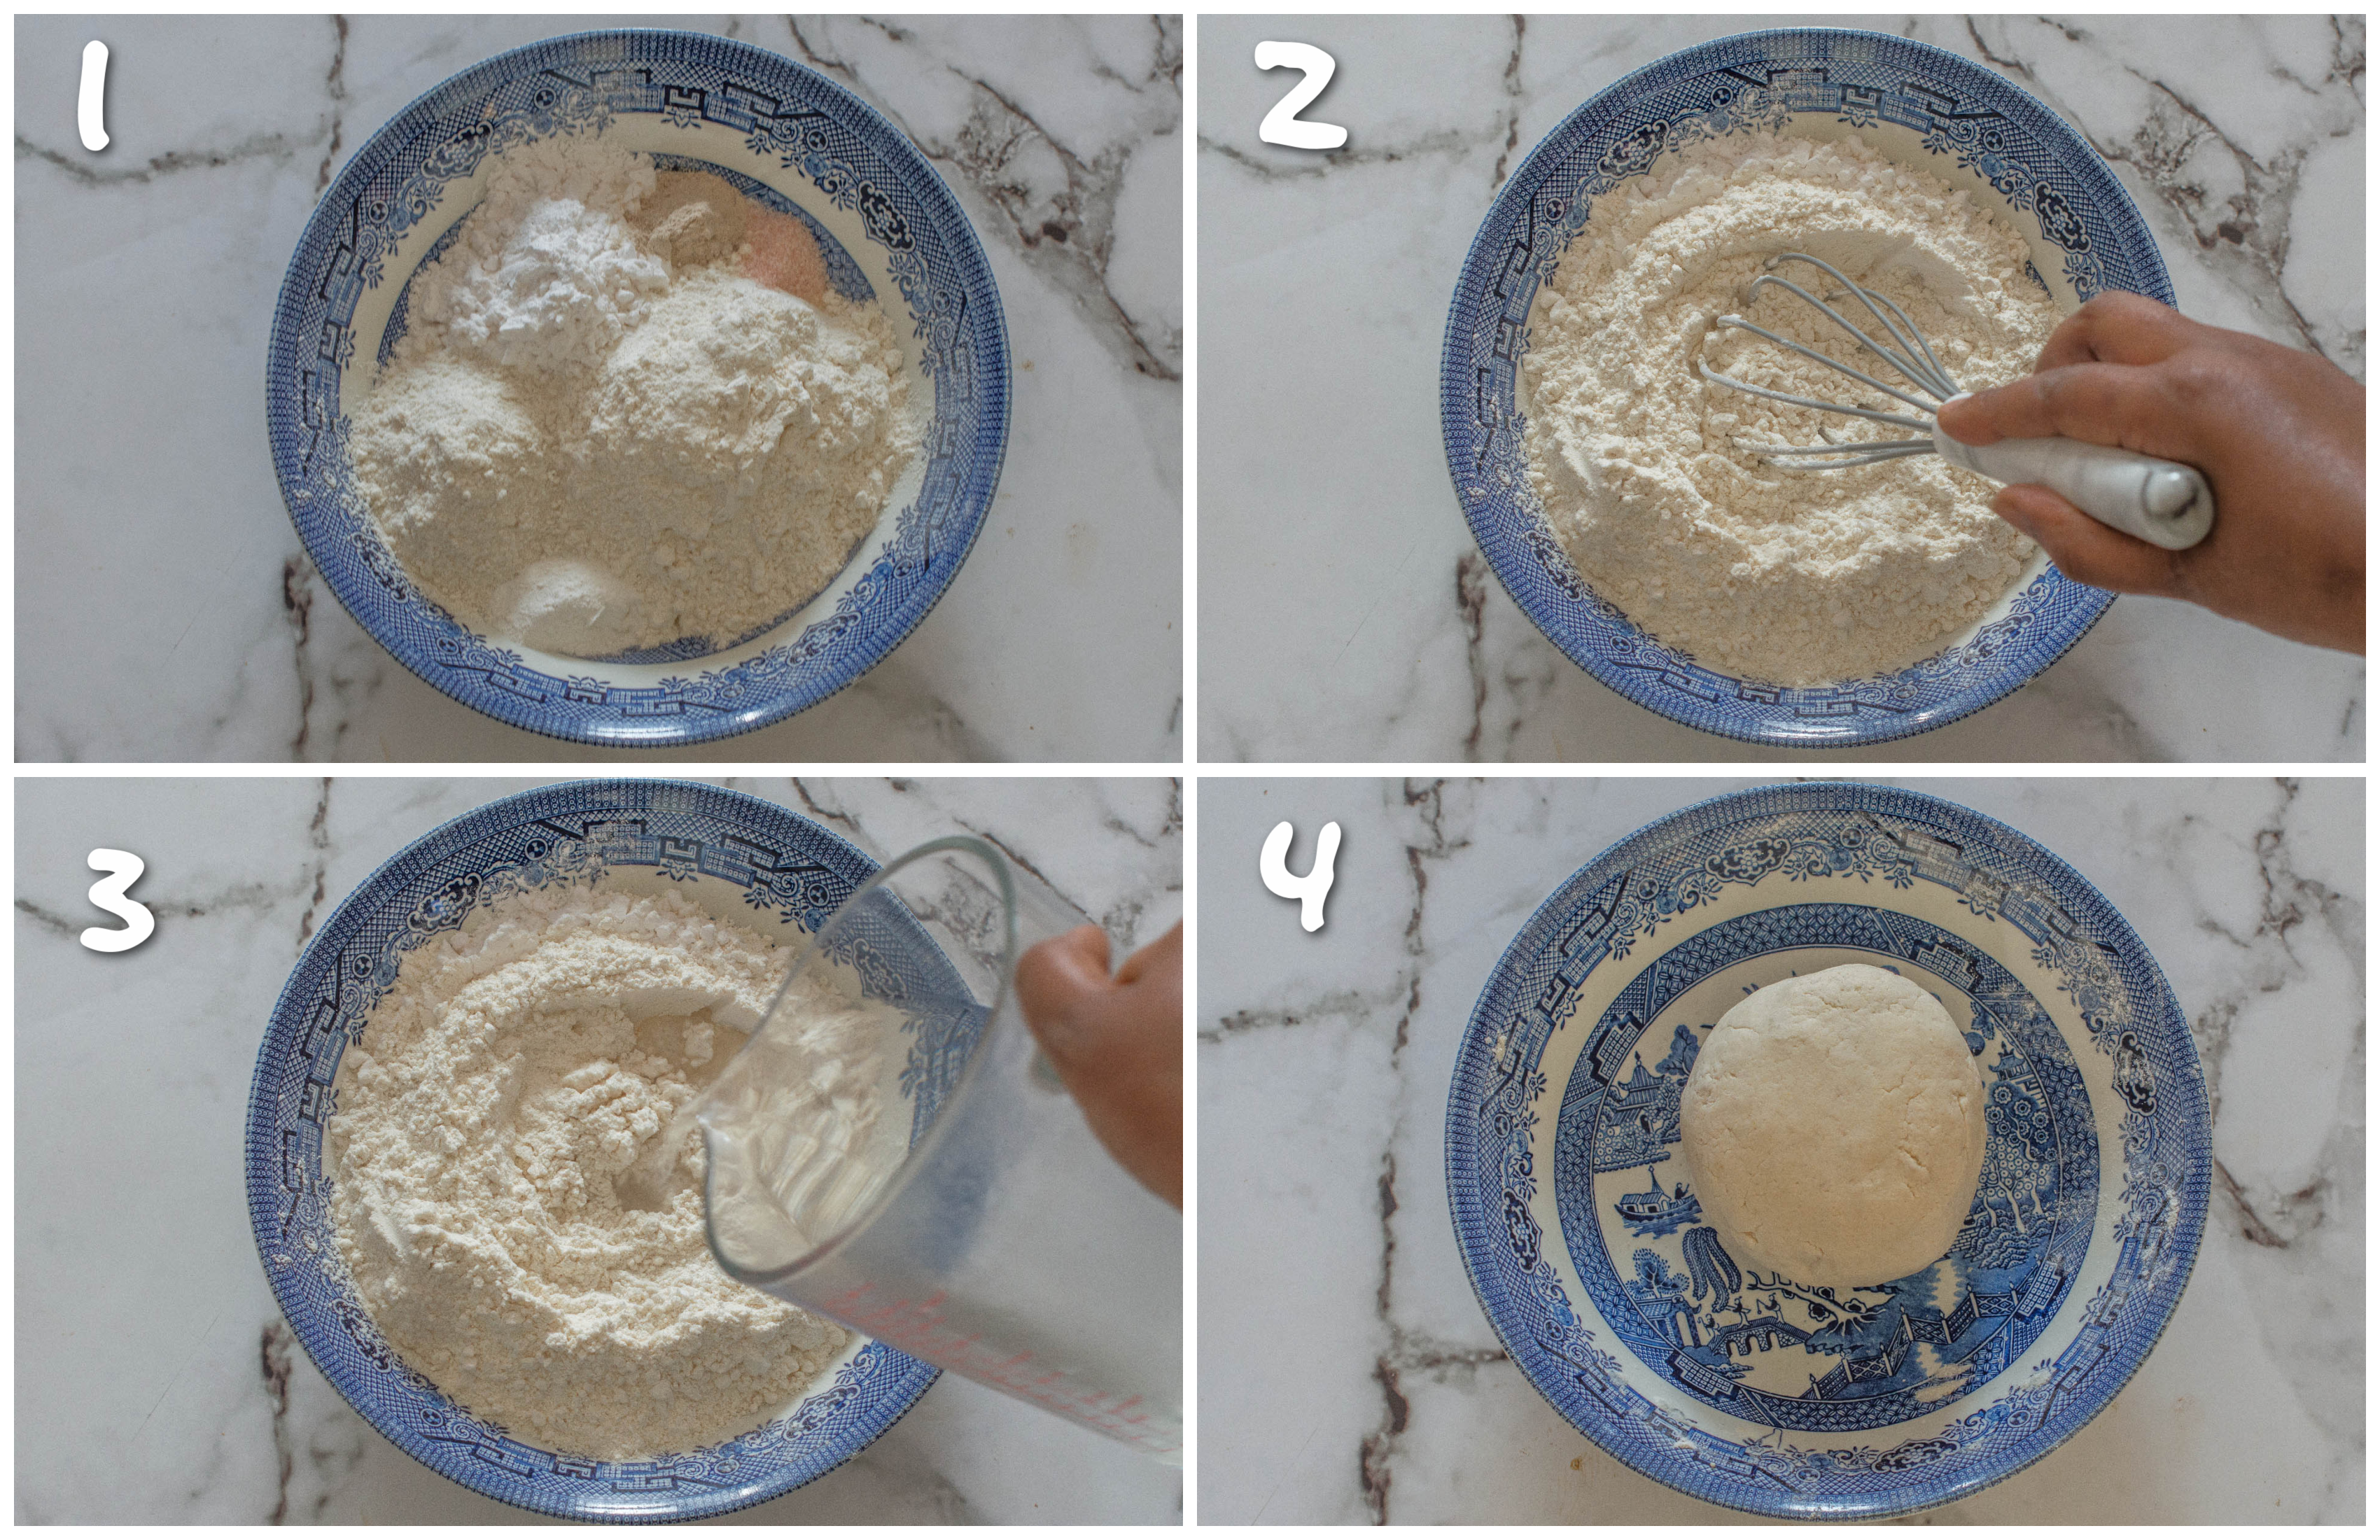 Steps 1-4 Making the dough